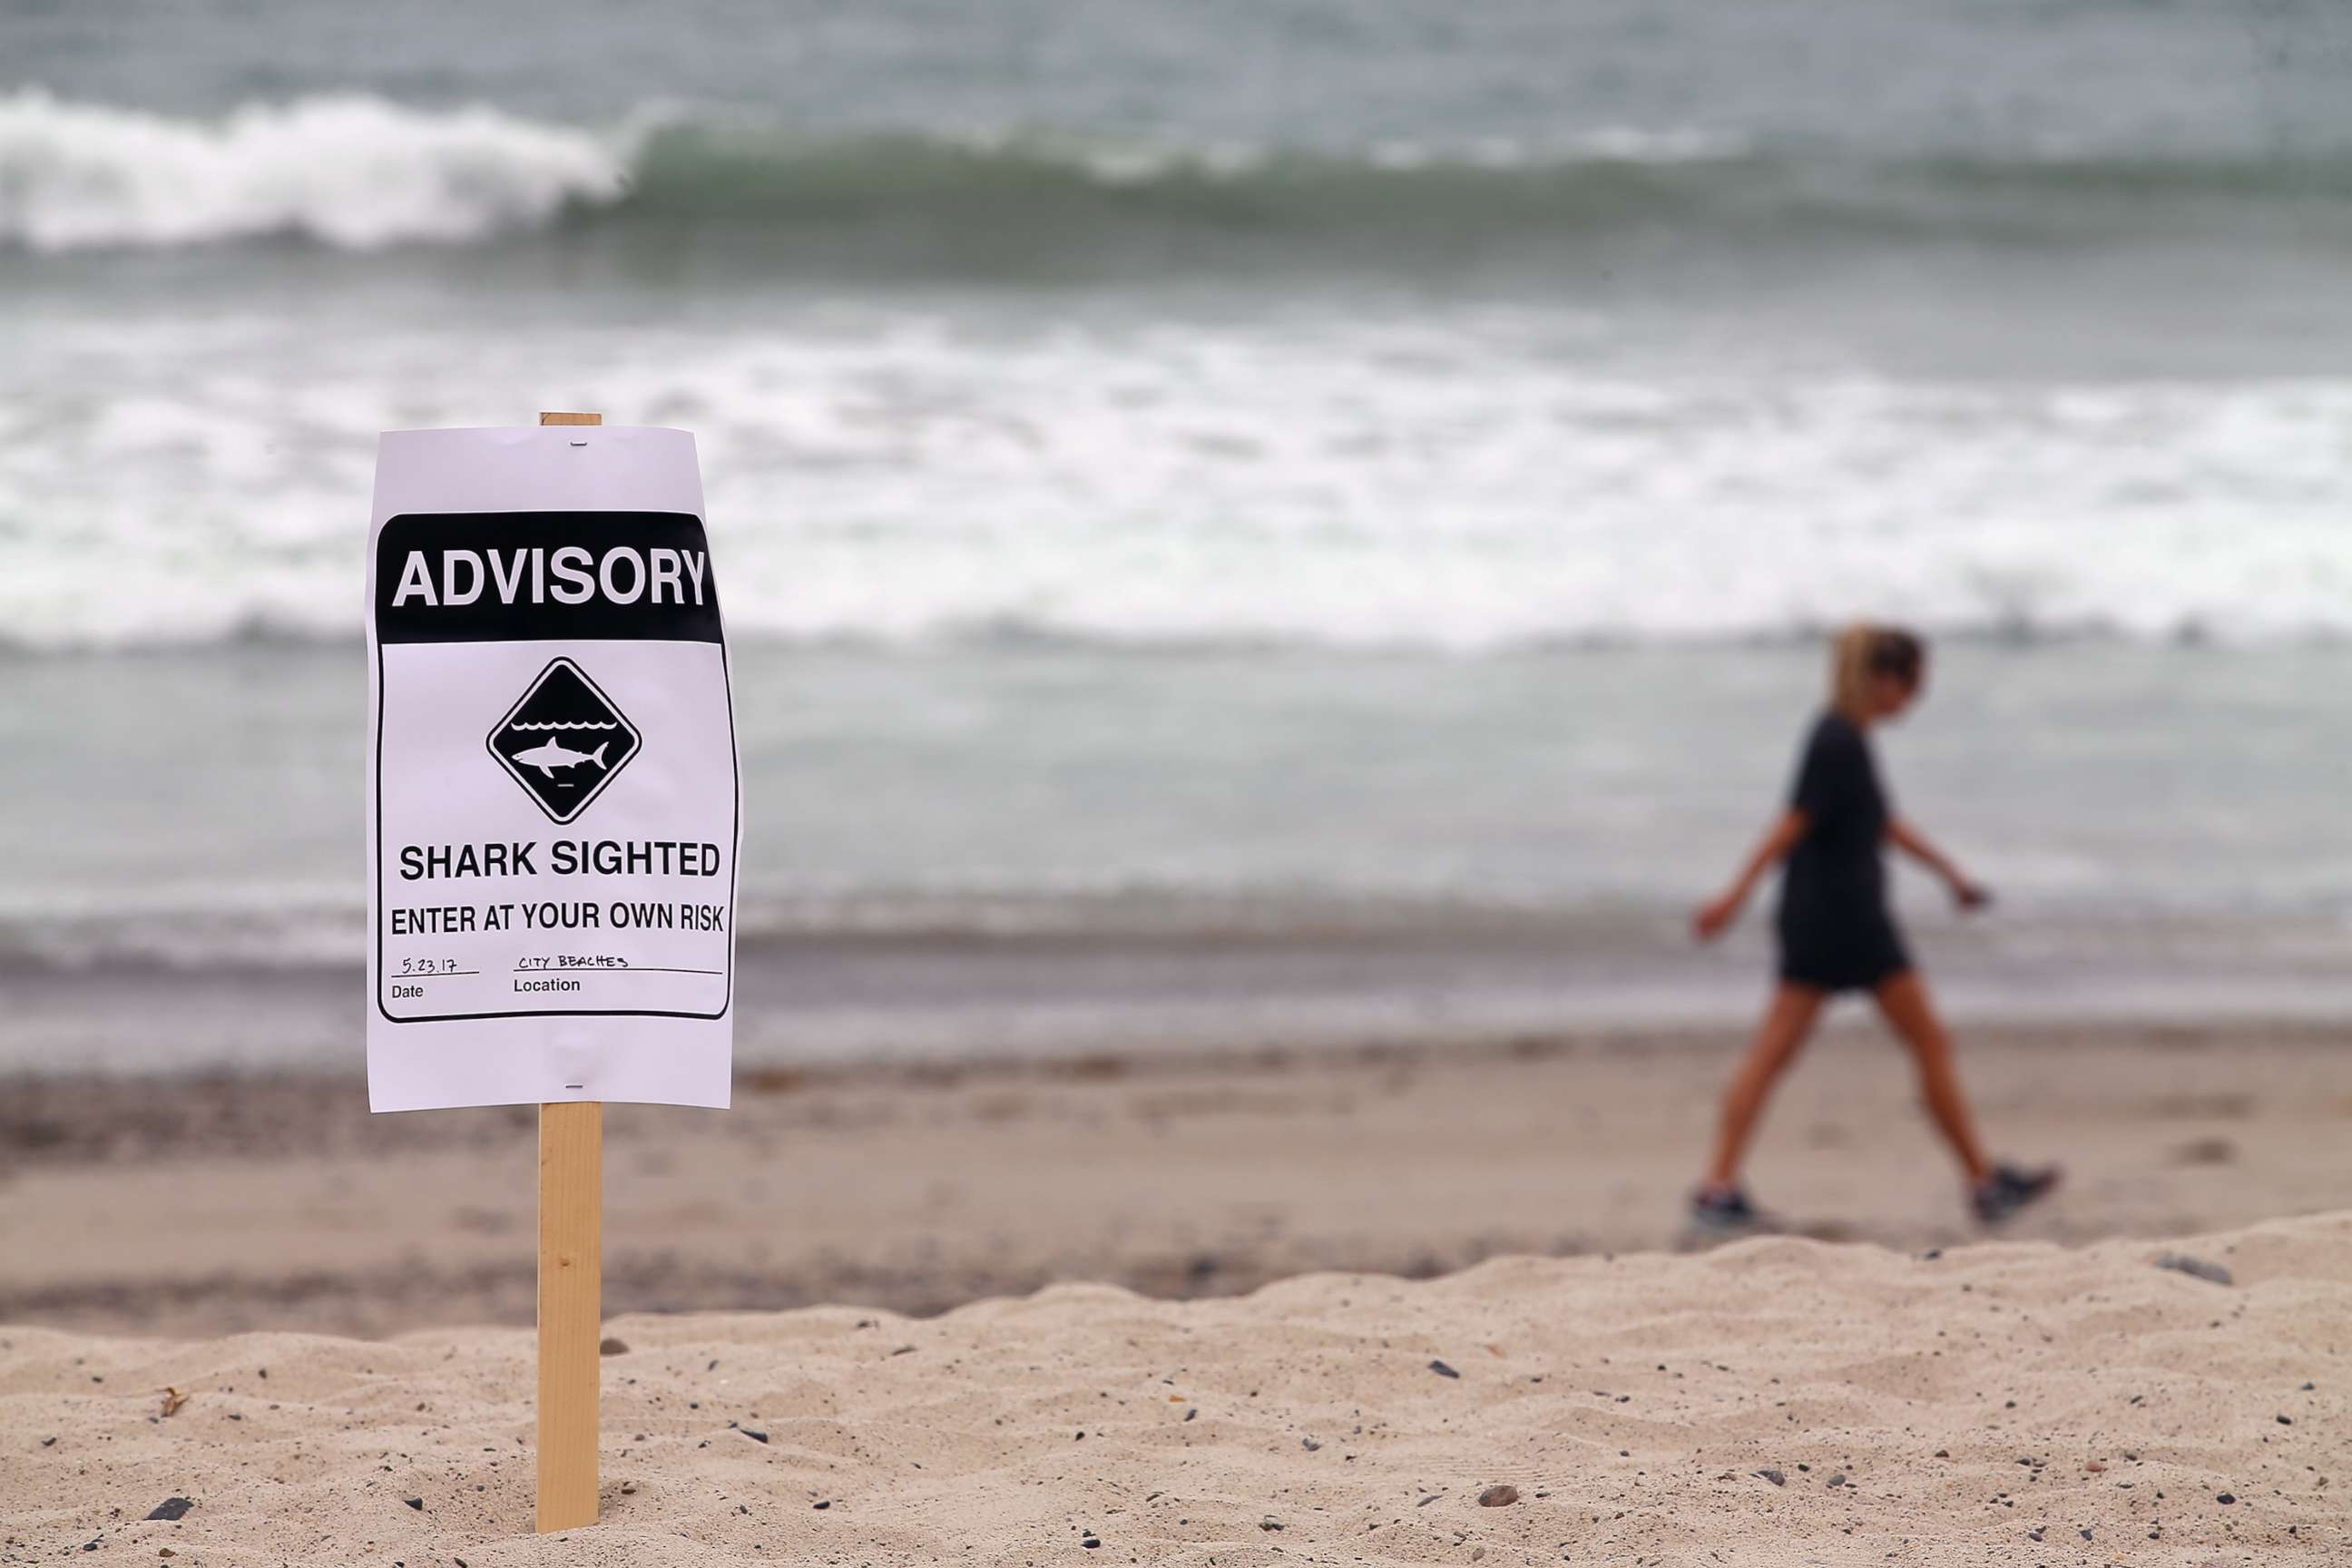 PHOTO: Warning signs are placed along the beach to warn swimmers and surfers of recent shark sightings in San Clemente, Calif., May 23, 2017.